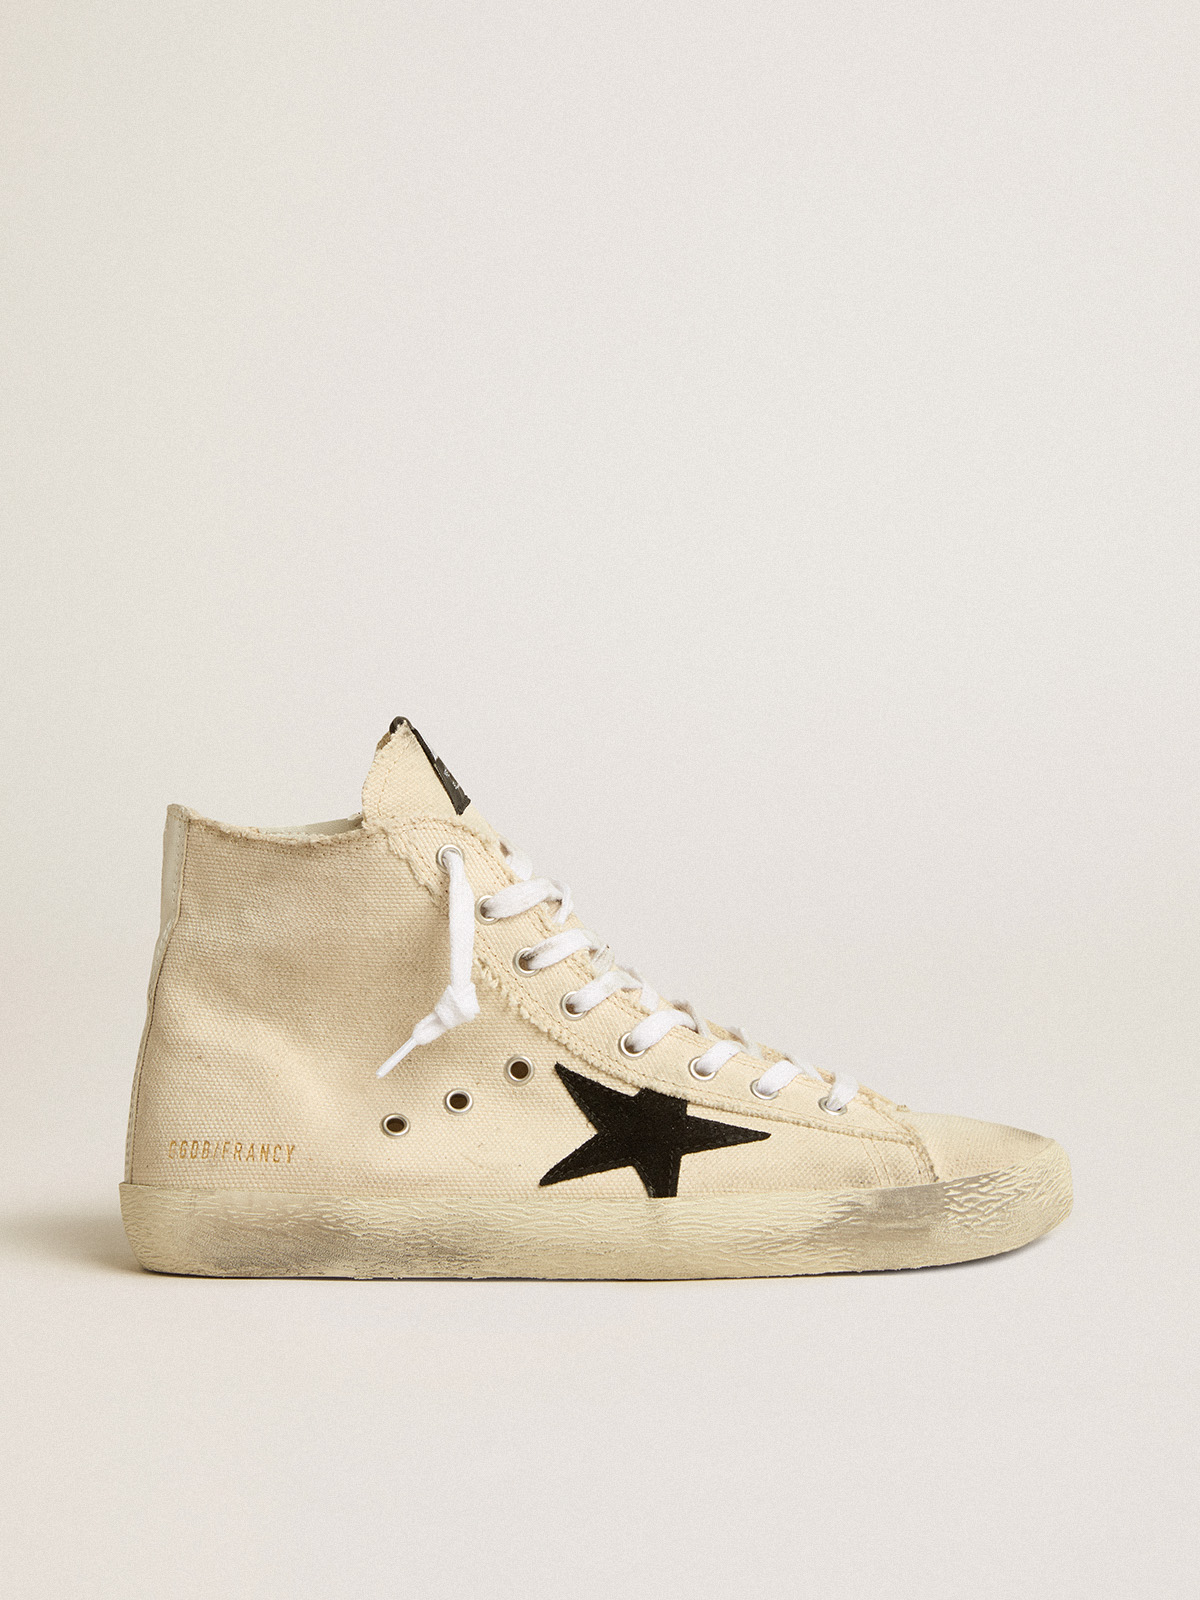 Francy Penstar in canvas with black suede star and leather heel tab |  Golden Goose